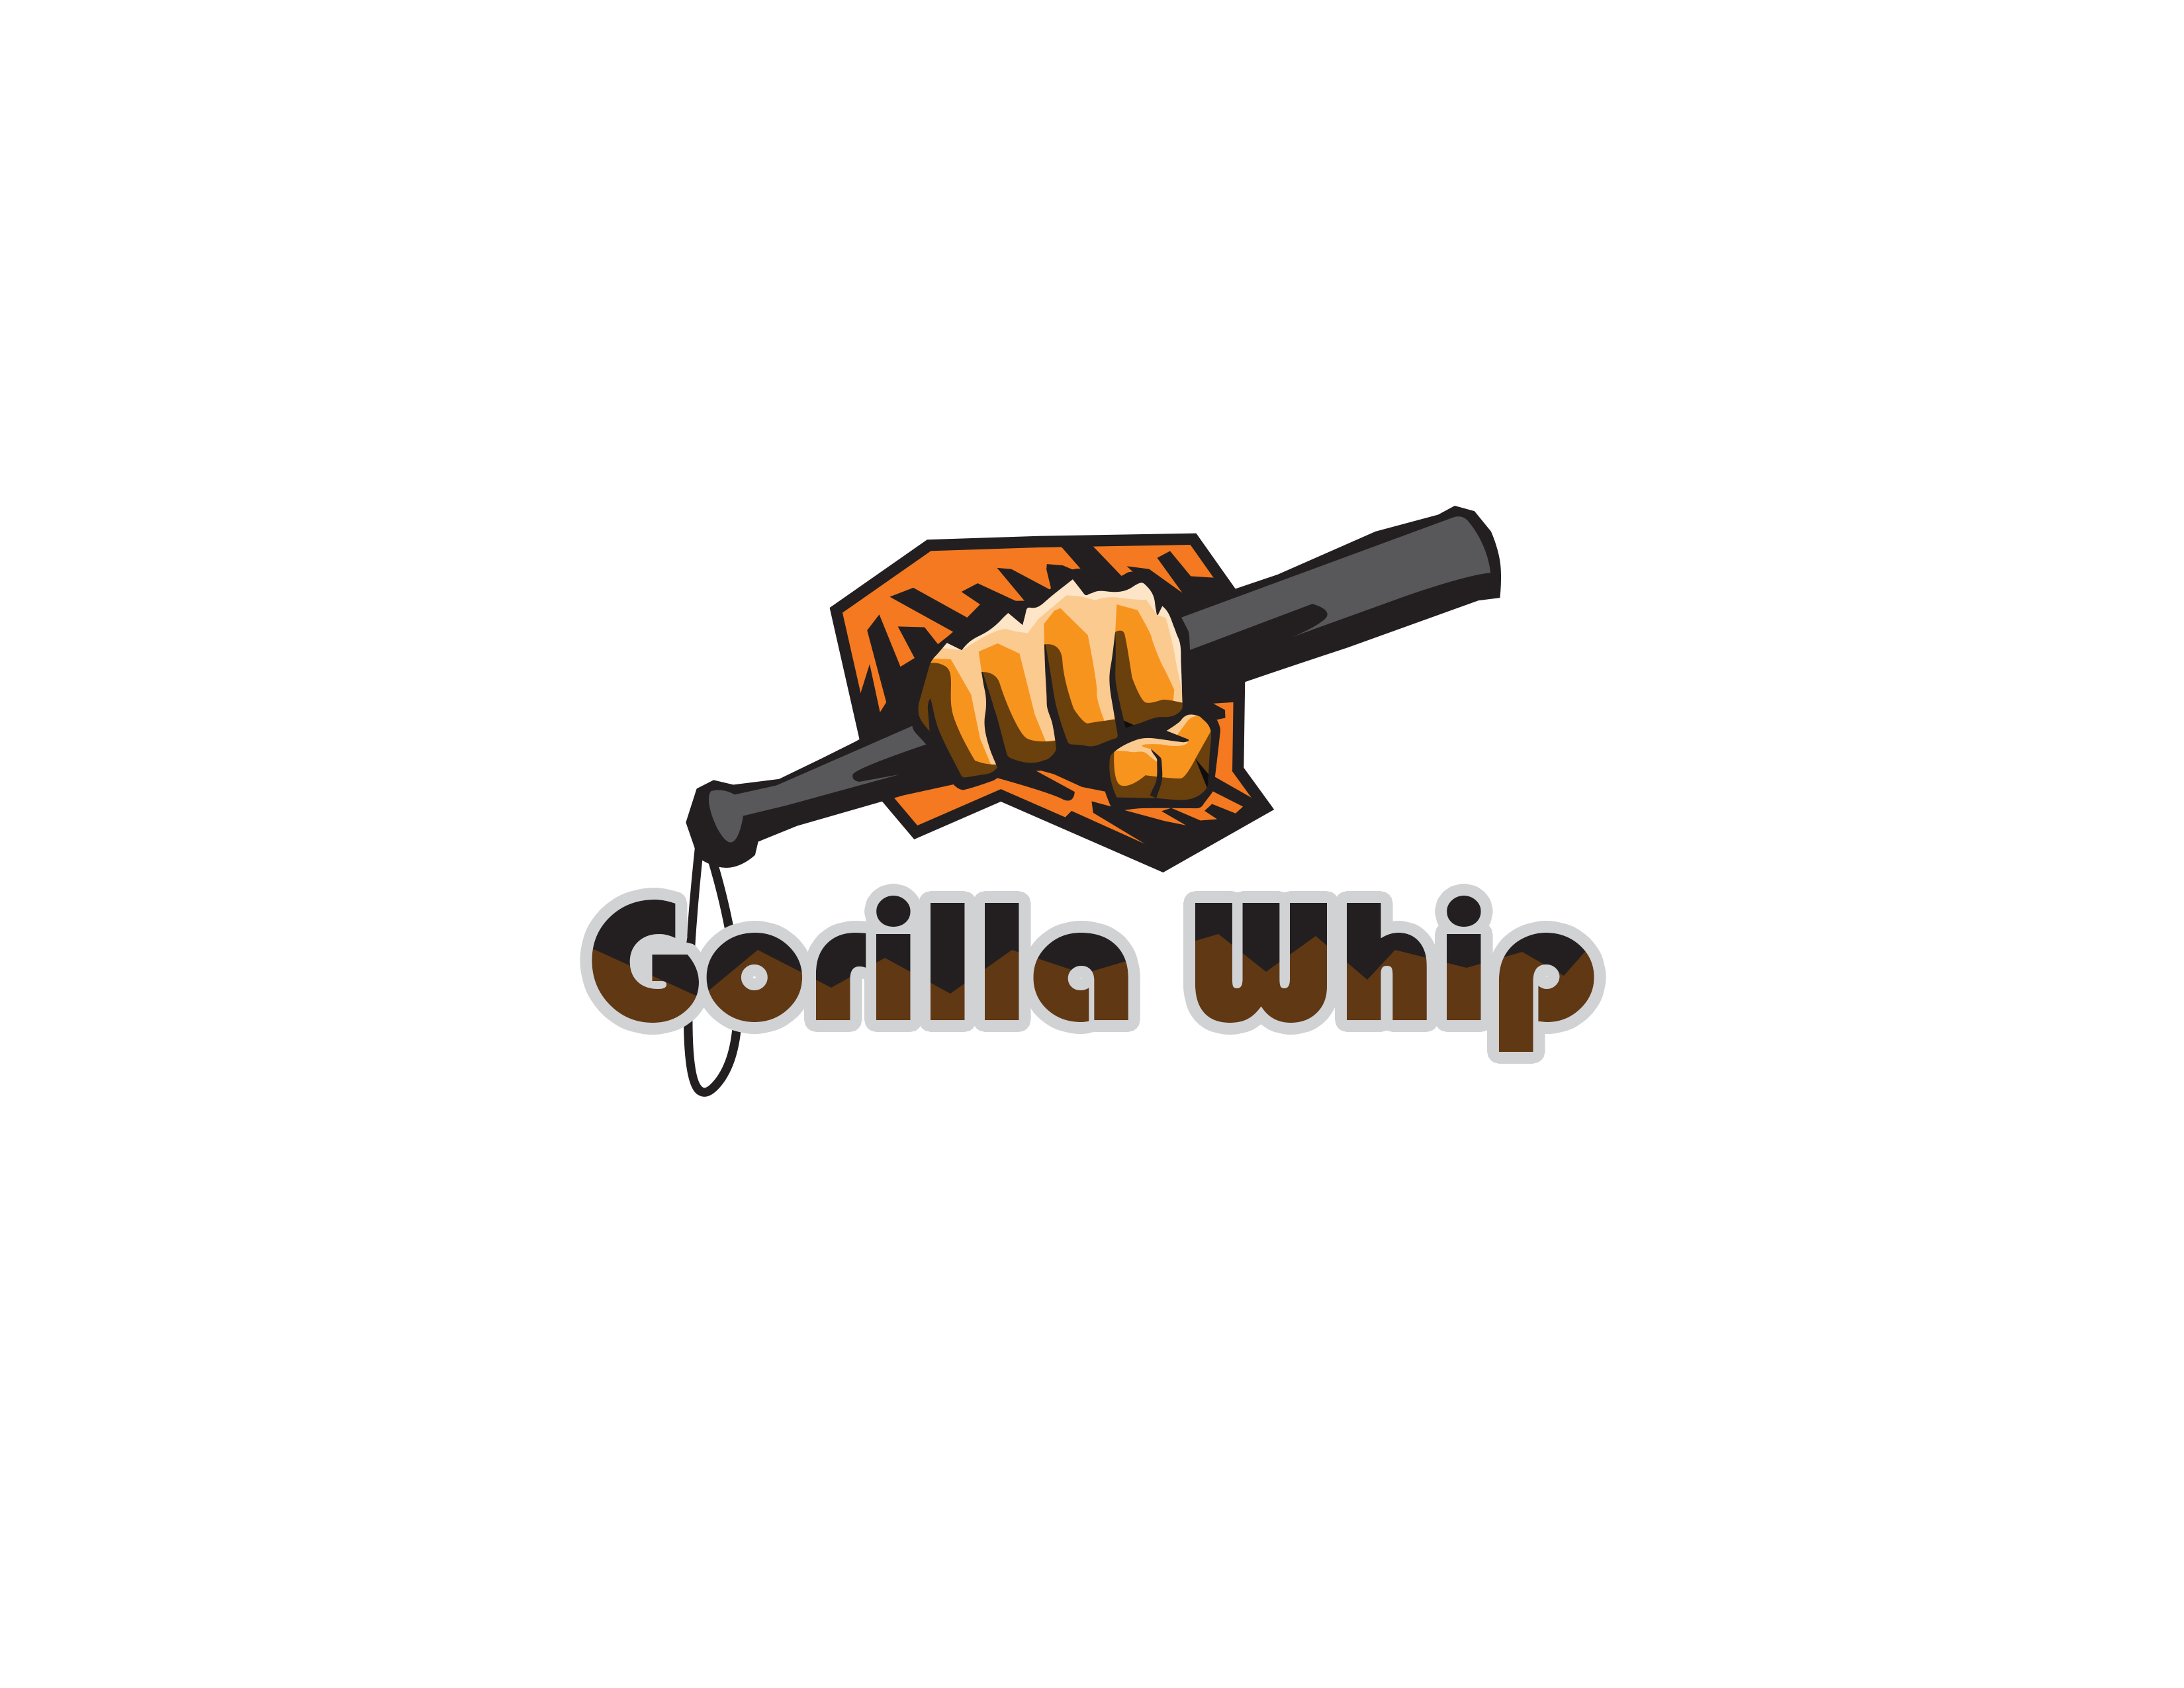 The Gorilla Whip is a safety invention specially made as a protective device in the form of a self-defense whip